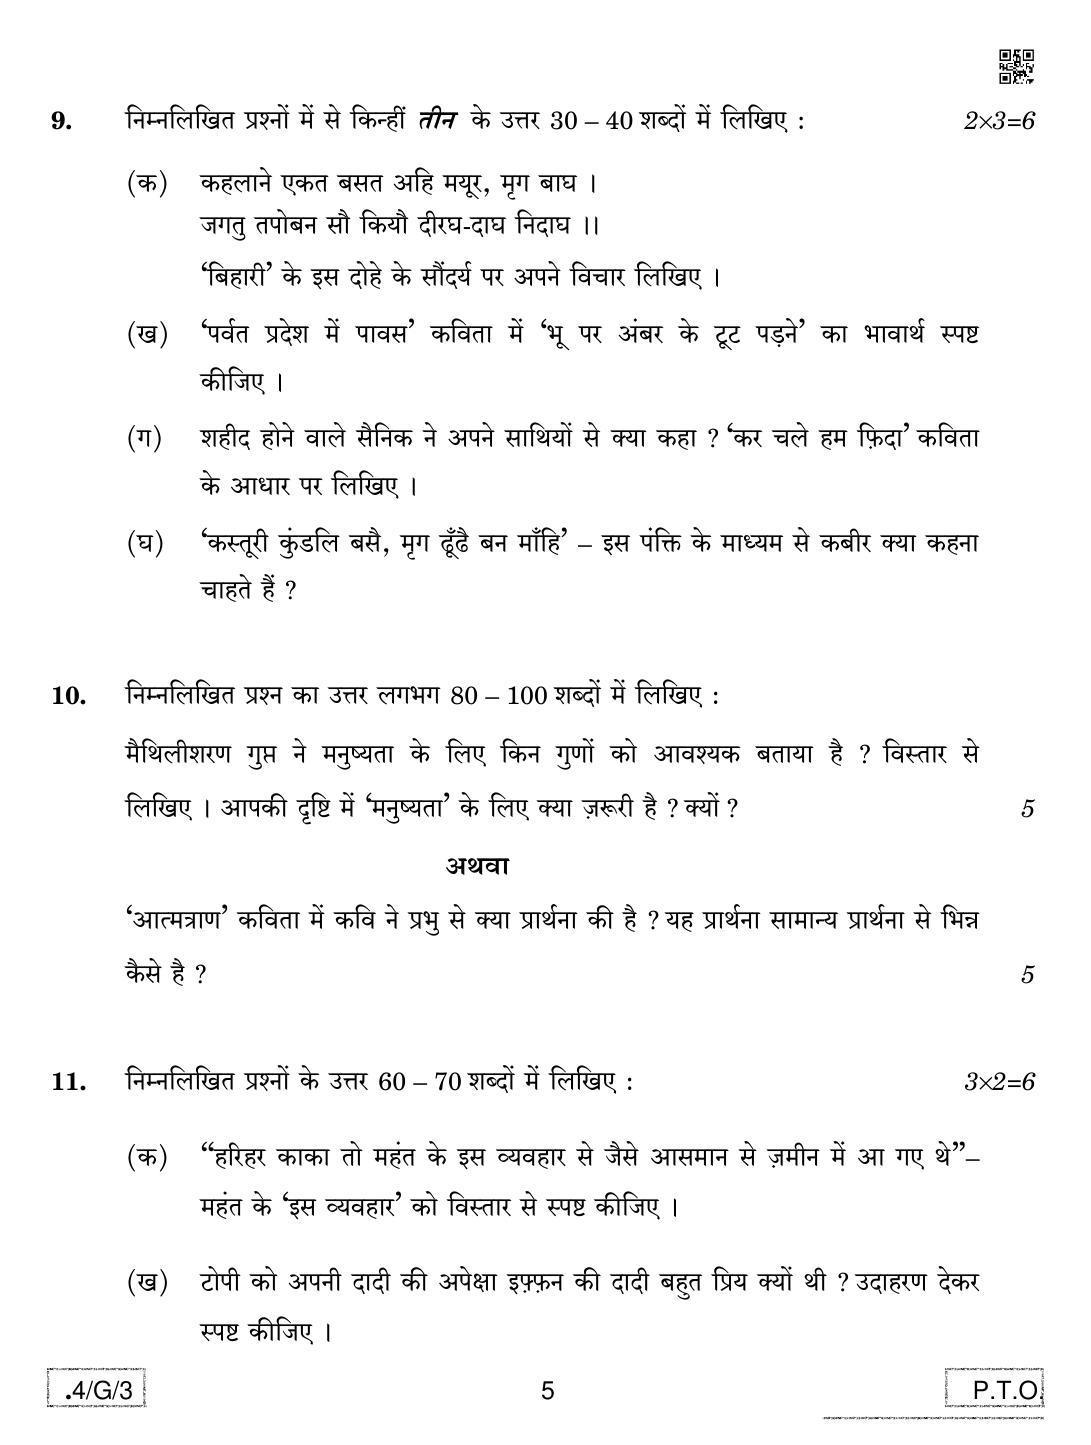 CBSE Class 10 4-C-3 Hindi B 2020 Compartment Question Paper - Page 5